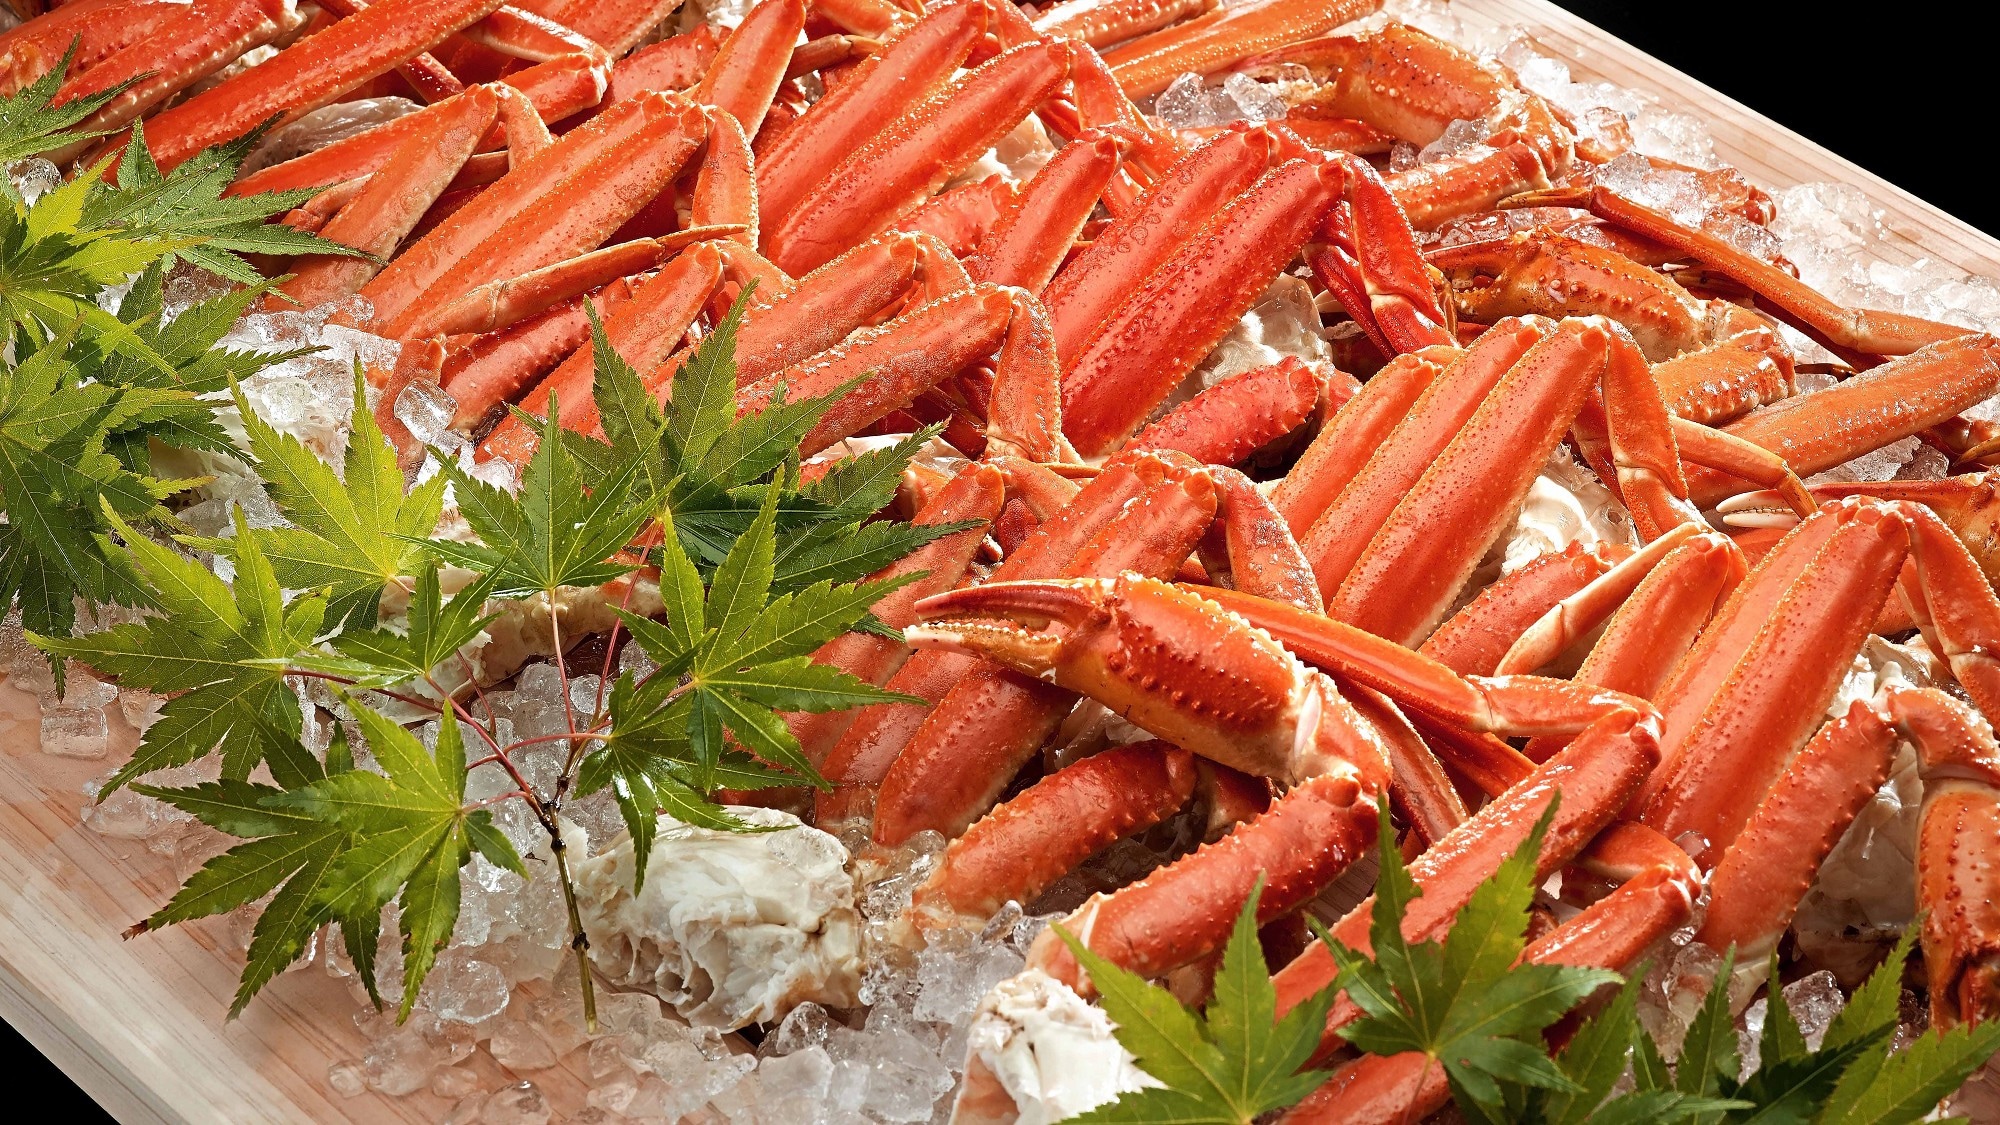 Special order All-you-can-eat snow crab (claws, legs)